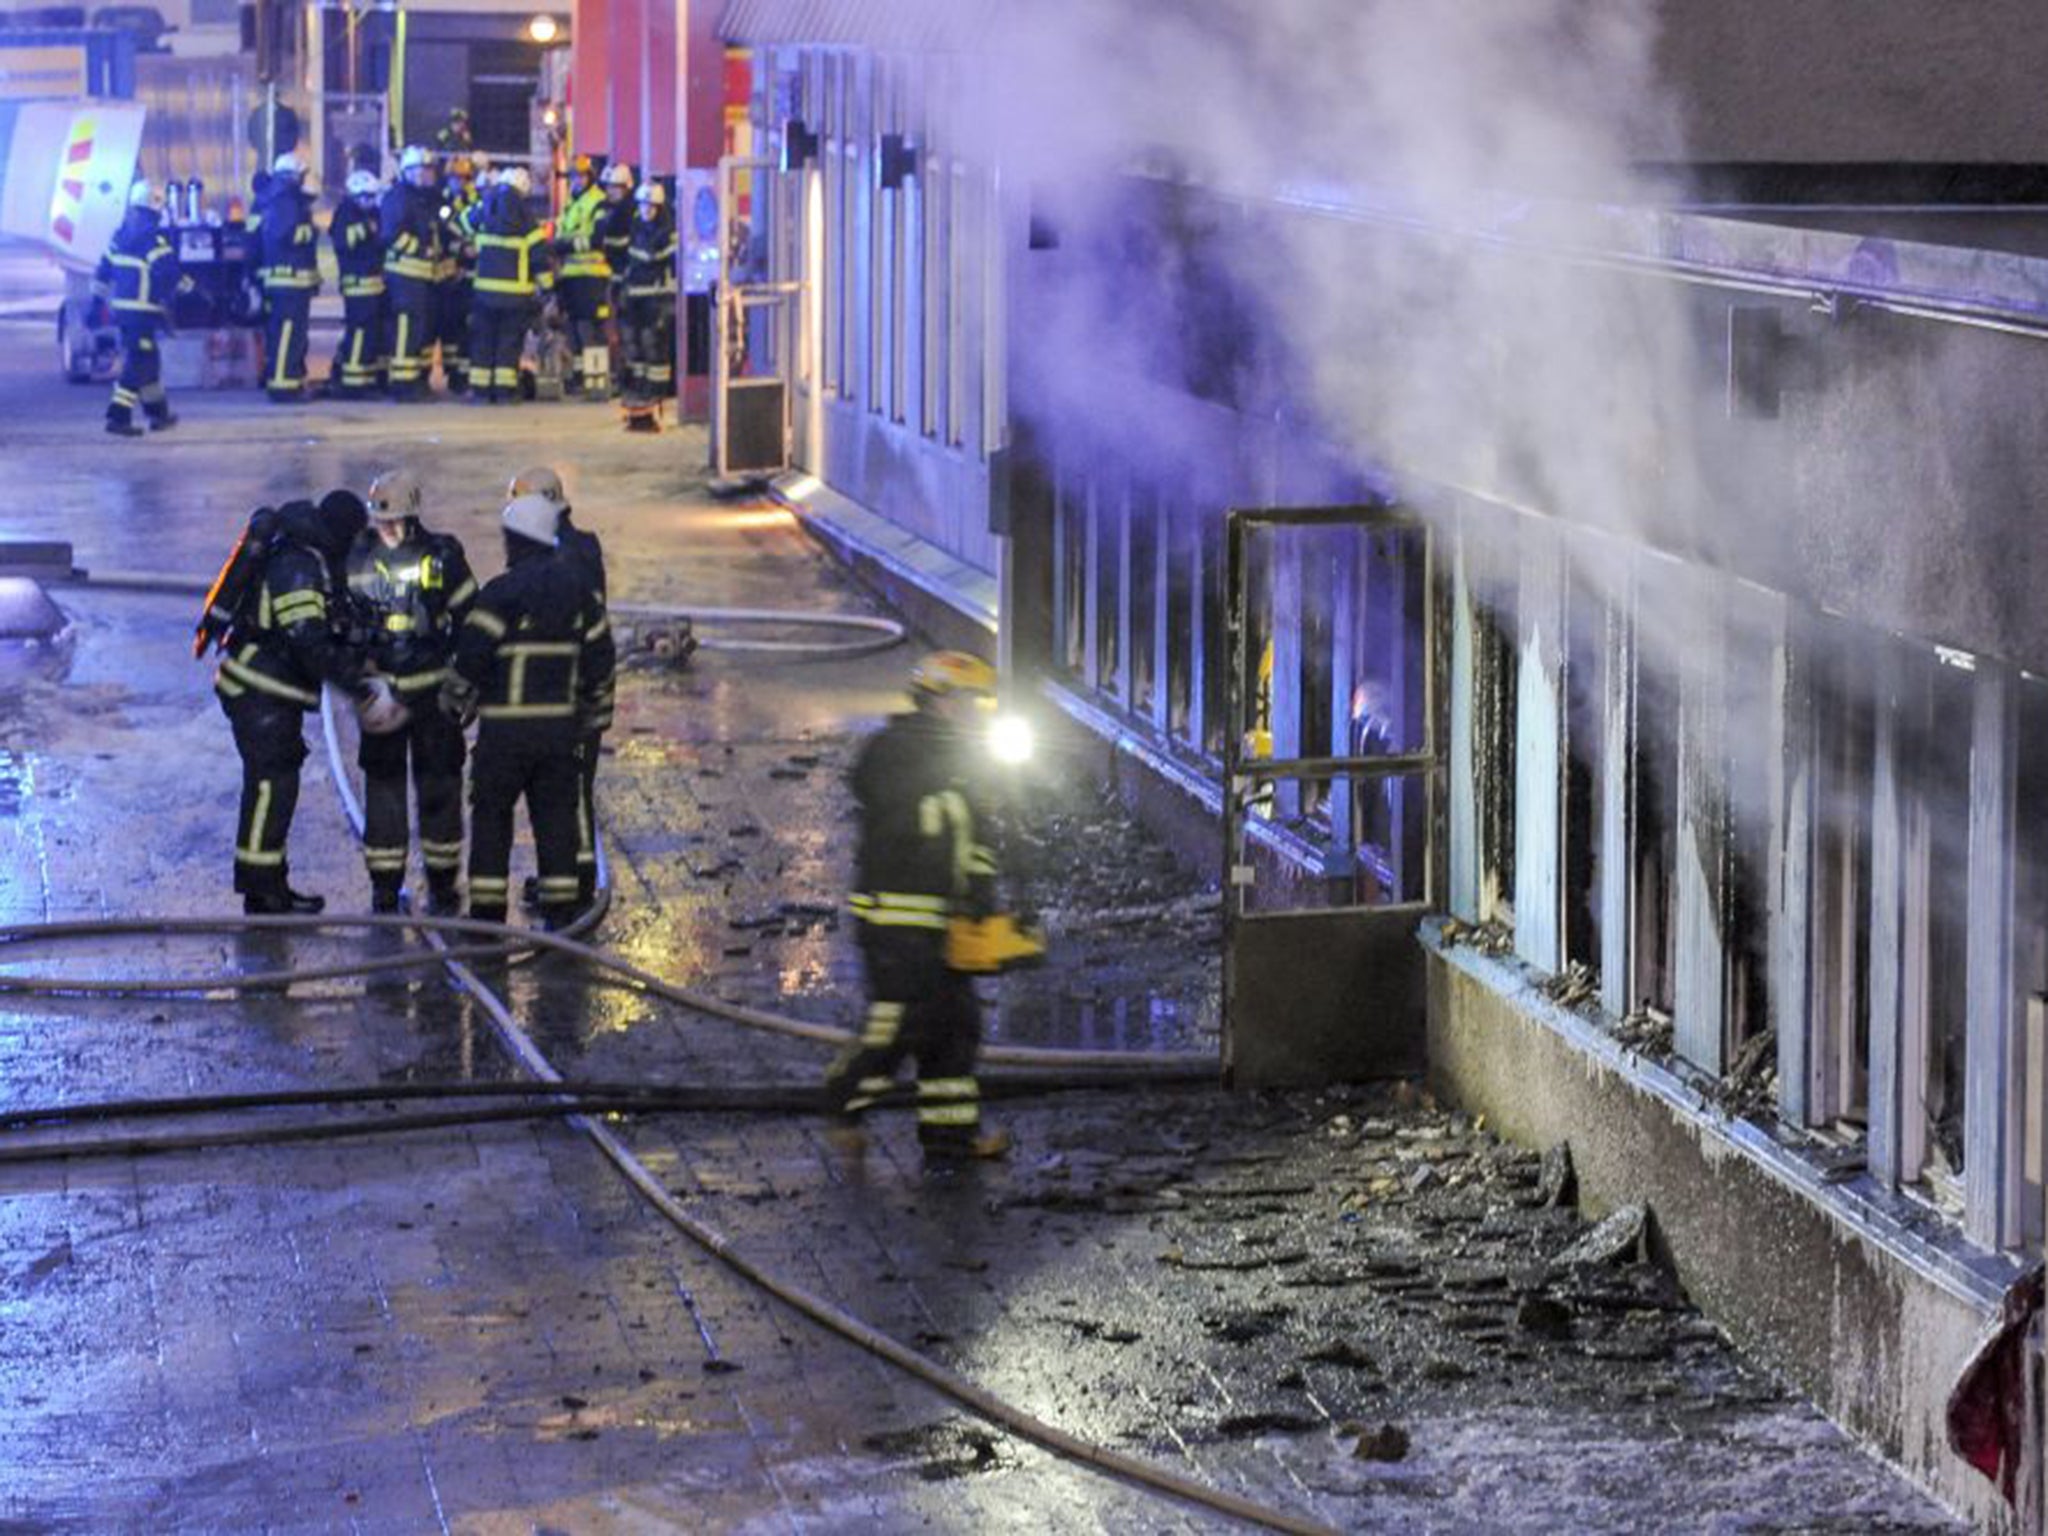 Firemen working to put out the blaze at the mosque in Eskilstuna, Sweden; five of the twenty at prayer inside were taken to hospital after inhaling smoke